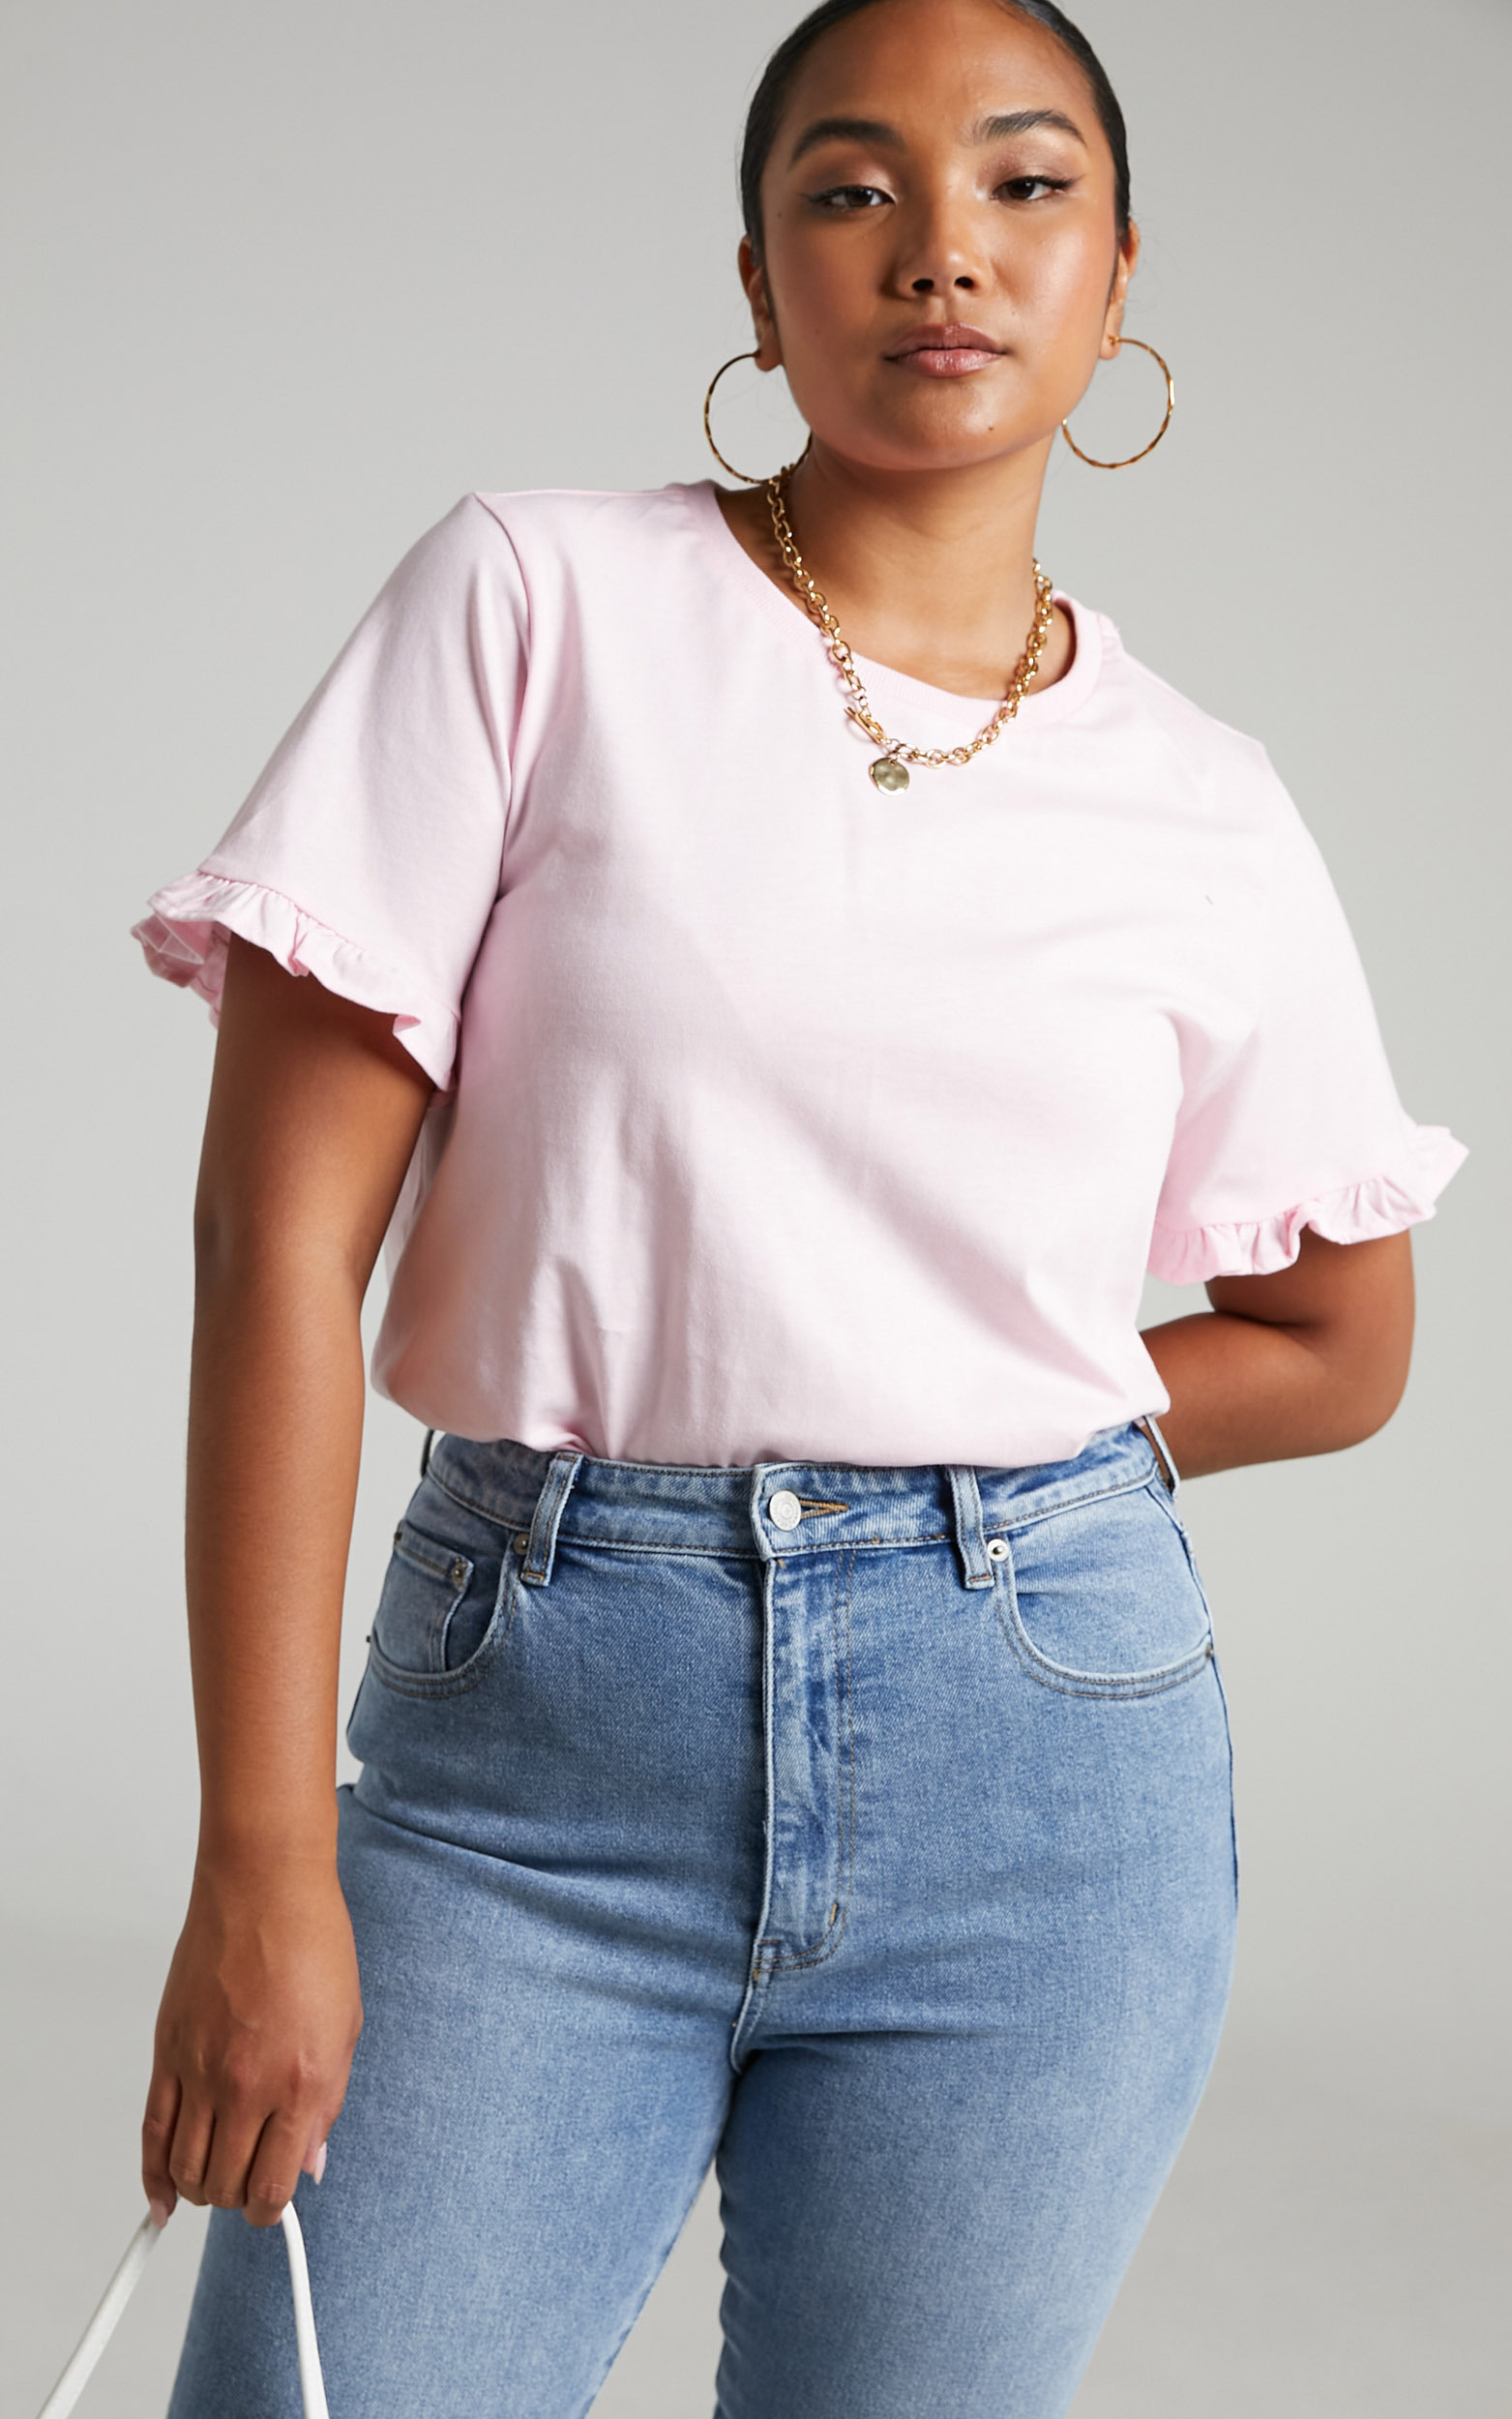 Closer To Home Ruffle Sleeve Tee in Pale Pink - 04, PNK2, hi-res image number null